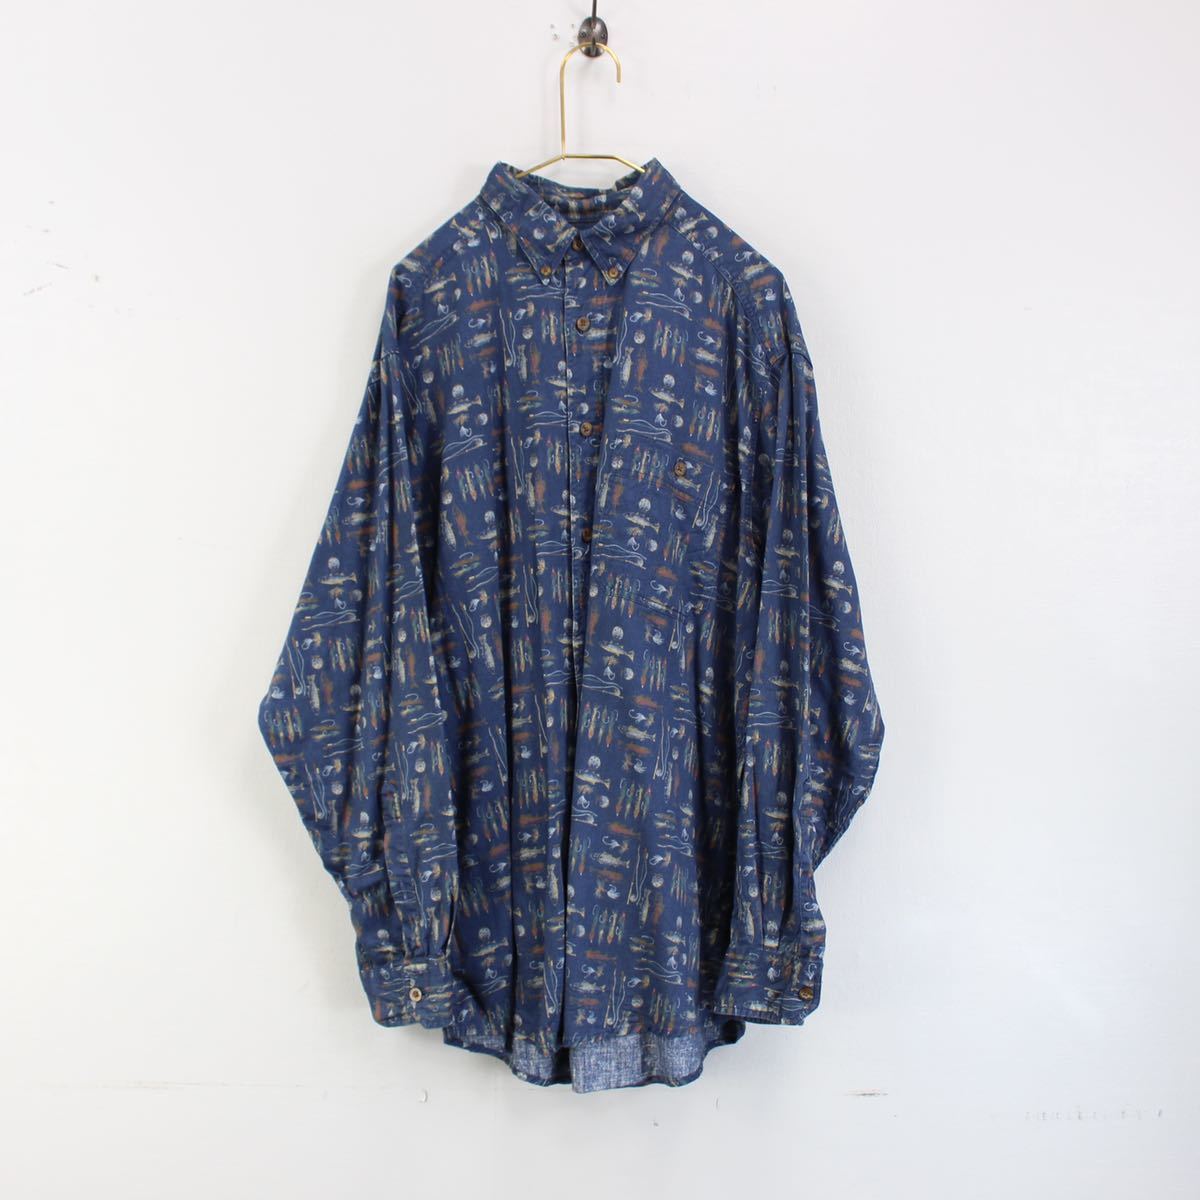 USA VINTAGE WOOL RICH FISH PATTERNED LONG SLEEVE SHIRT/アメリカ古着ウールリッチ魚柄長袖シャツ_画像4